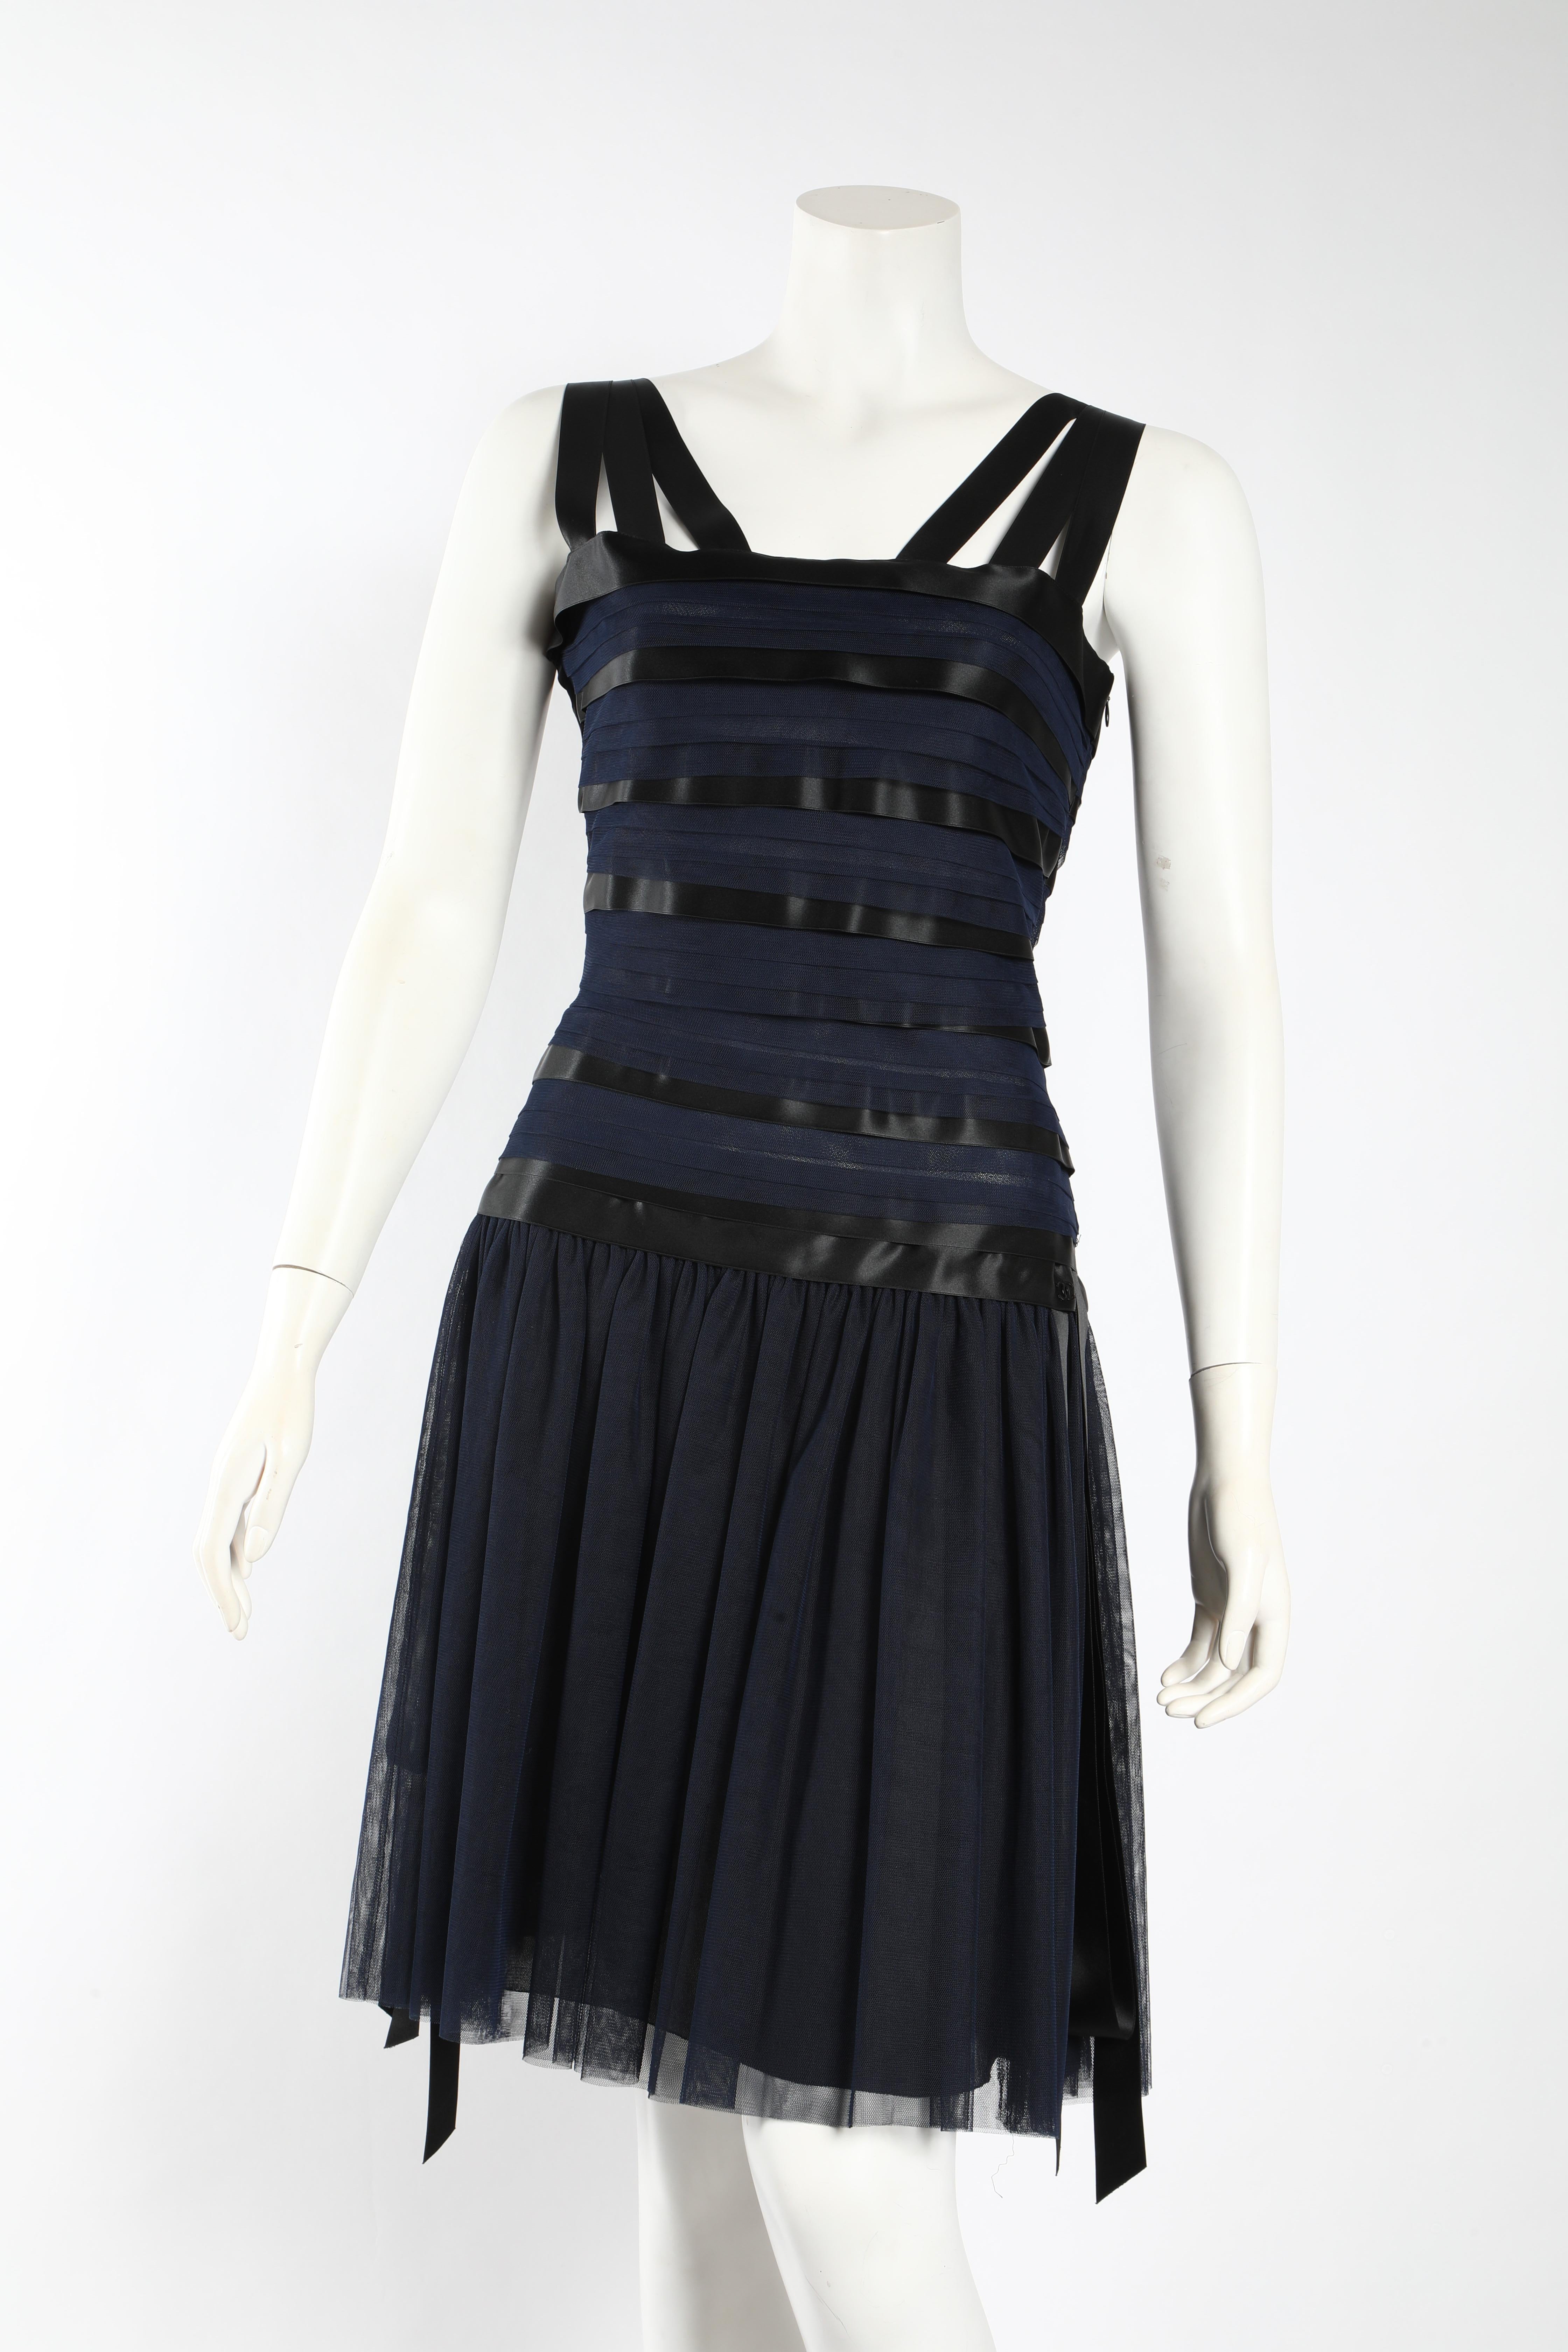 This gorgeous navy and black and ribbon Chanel runway dress is one of a kind. 
Gorgeously classic, but a show stopper.  
CHANEL 06A Runway Black silk ribboned dress with a square neckline and ribbon straps. The silhouette is a drop waist -  slim and